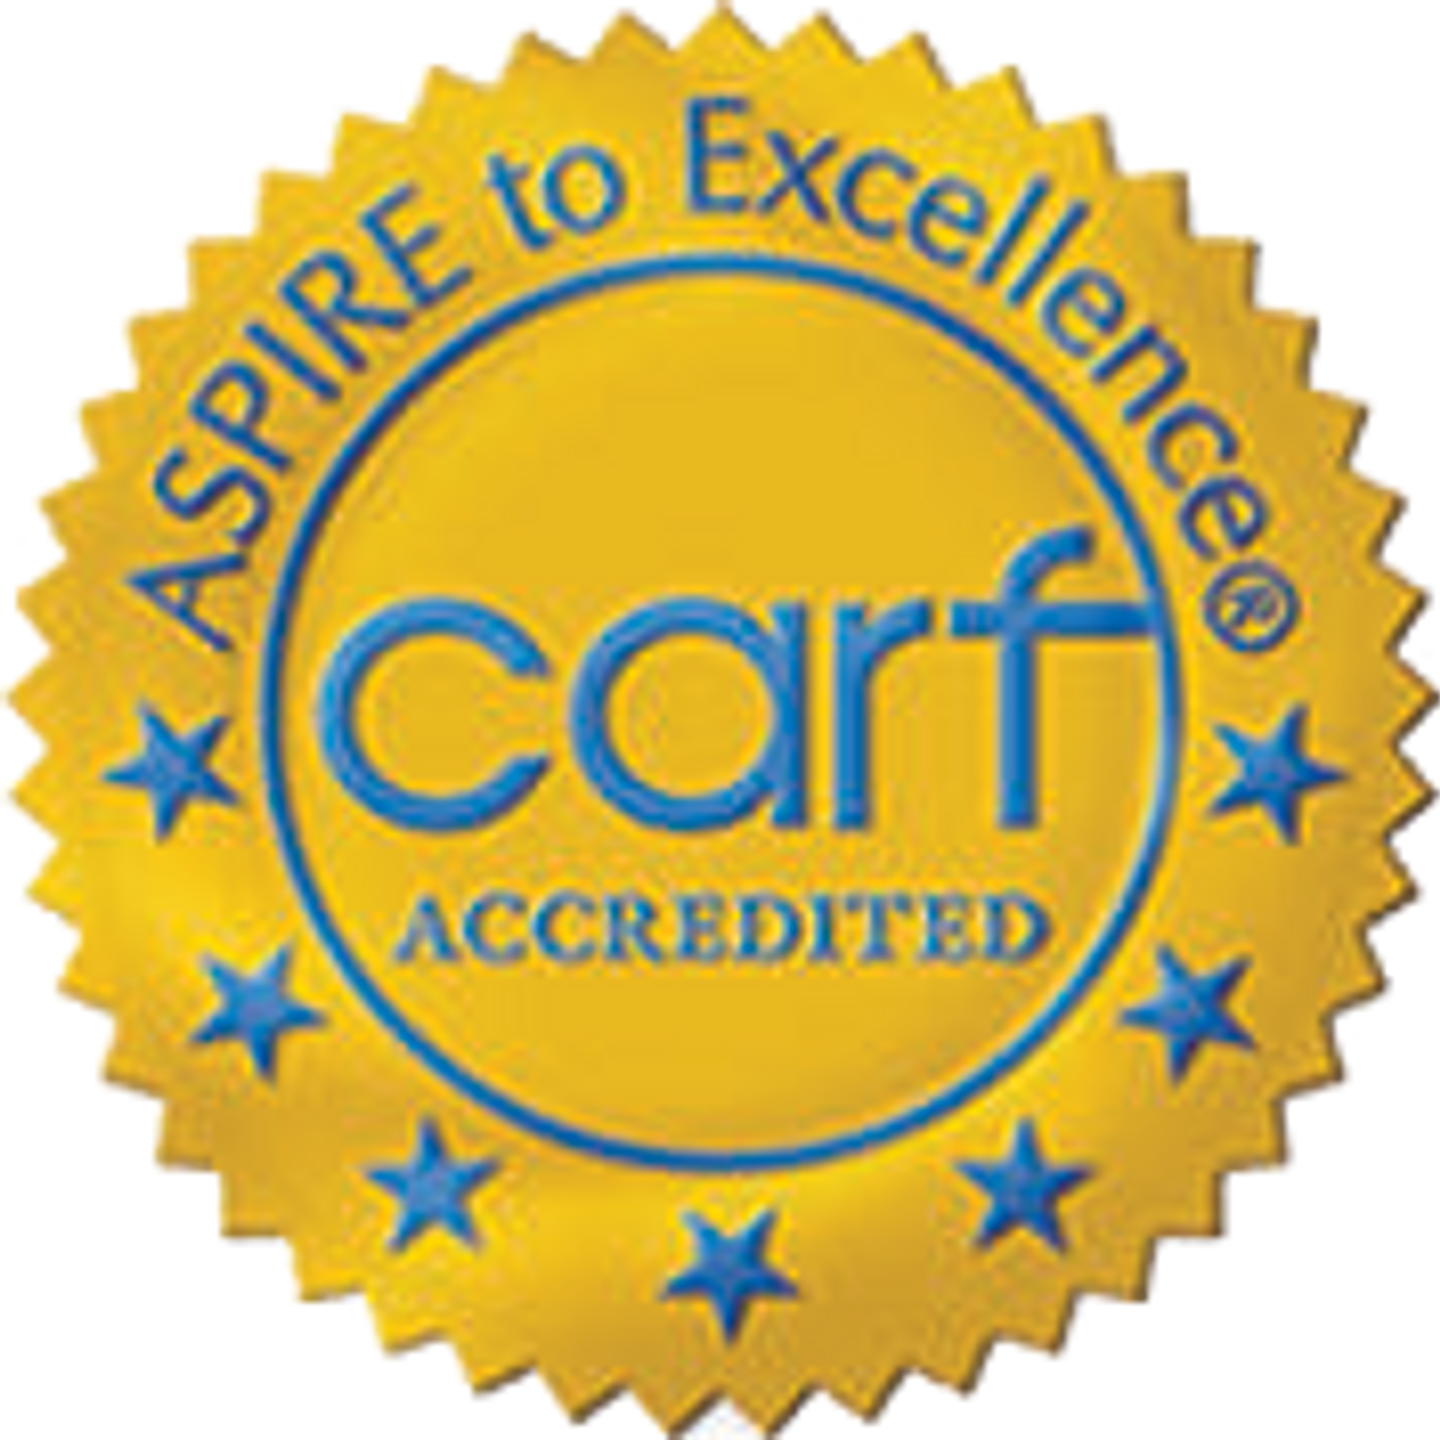 CARF (Commission on Accreditation of Rehabilitation Facilities) Accredited Aspire to Excellence logo